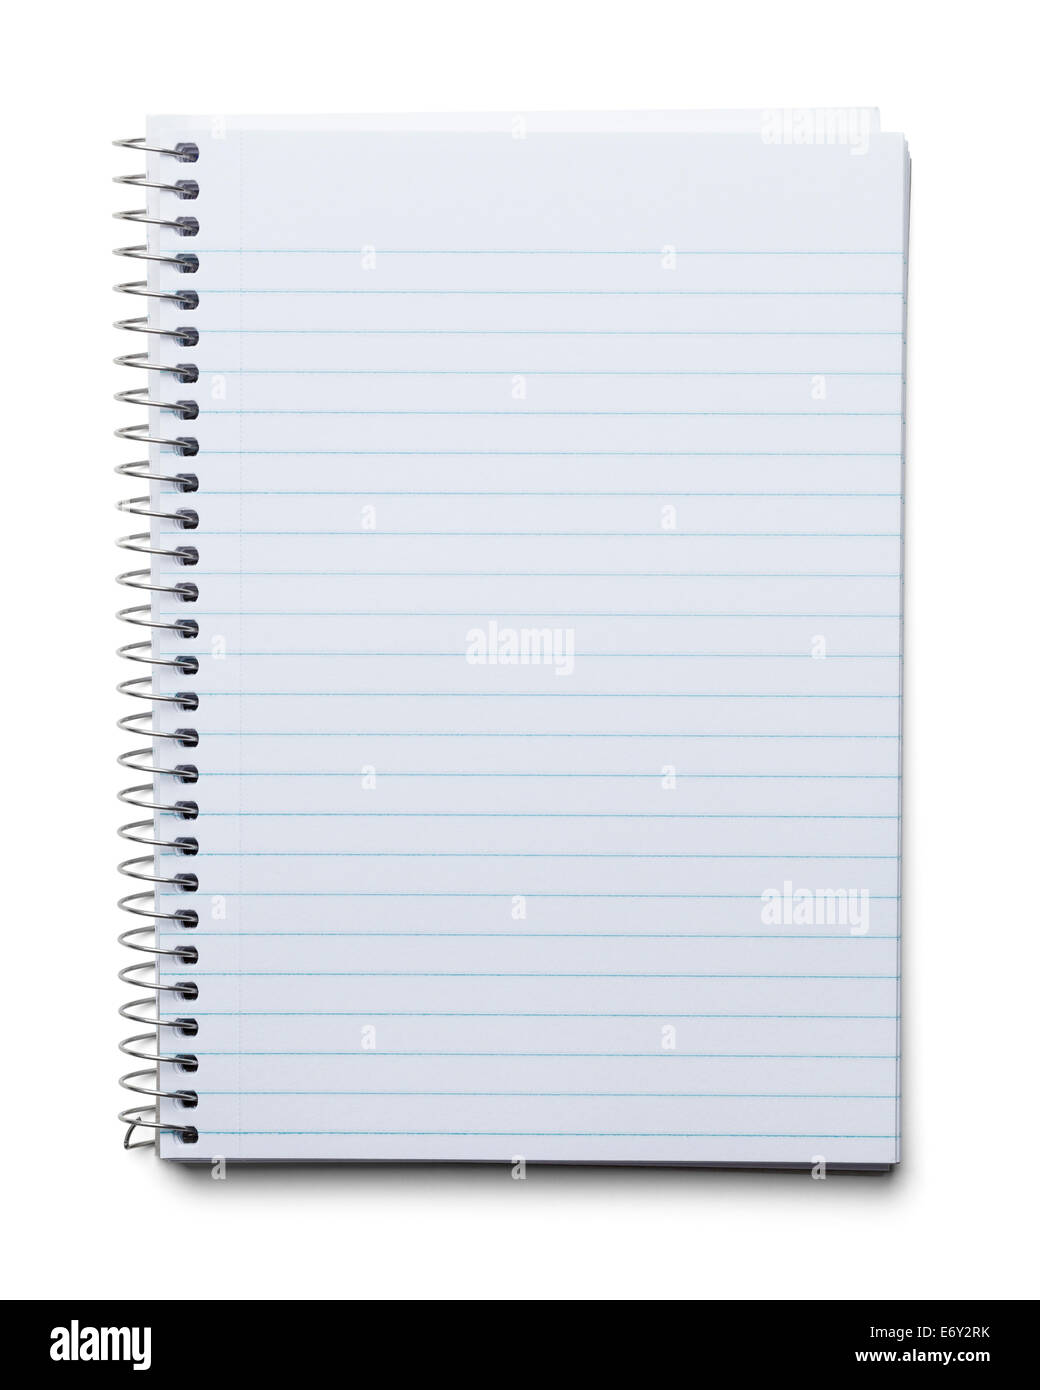 Blank Spiral Notebook with Line Paper Isolated on a White Background. Stock Photo